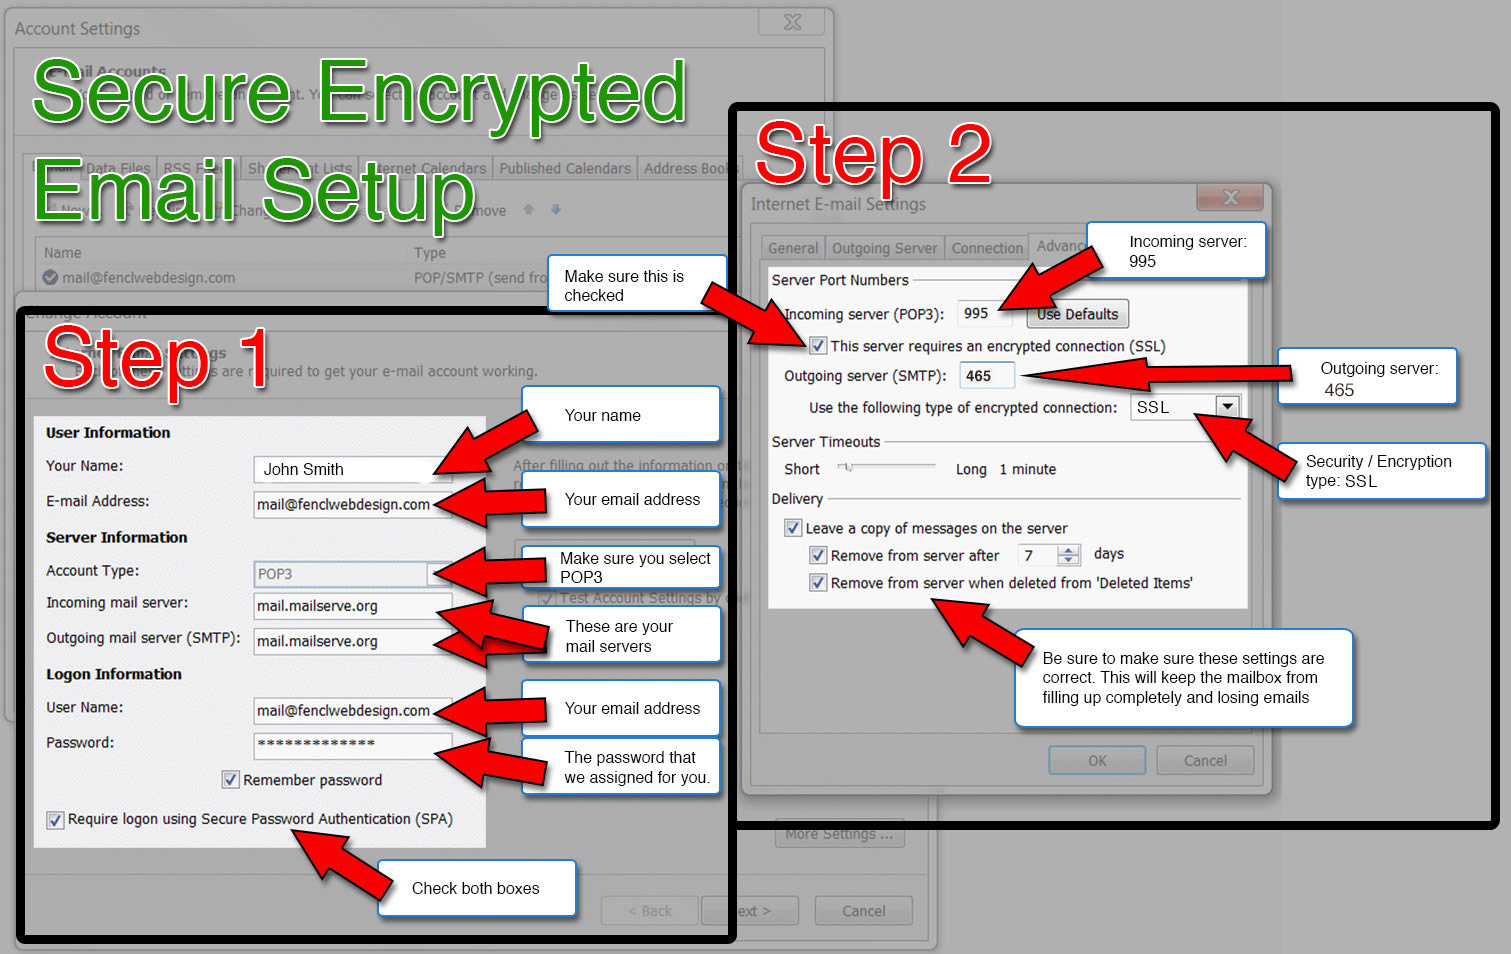 Step by Step process for Secure Encrypted Email Setup